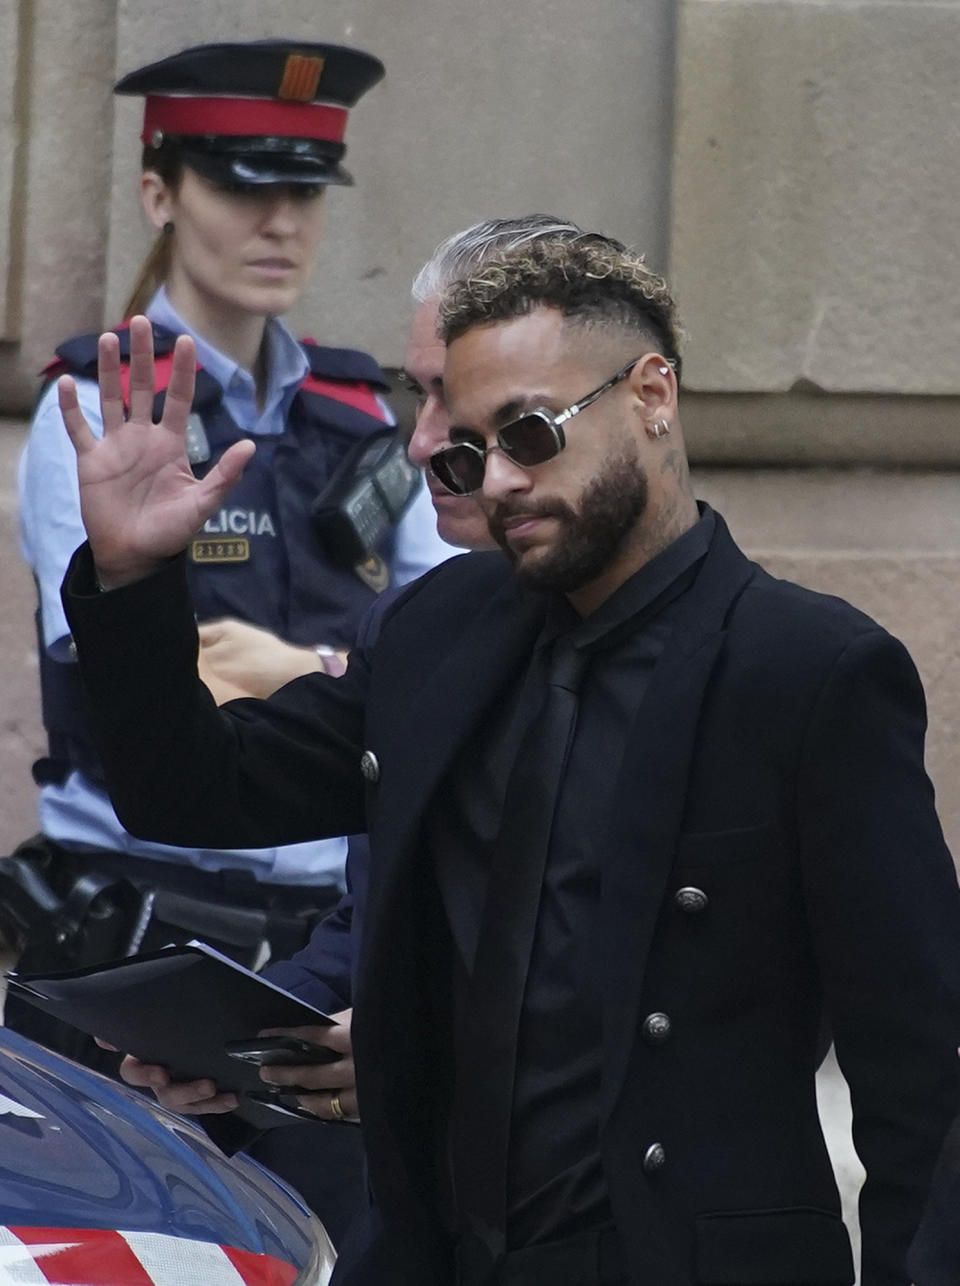 Former FC Barcelona player Neymar who now plays for Paris Saint-Germain waves on arrival at a court in Barcelona, Spain, Monday Oct. 17, 2022. Neymar returned to Spain Monday to face trial on fraud charges regarding his 2013 transfer from Santos to FC Barcelona. The Brazilian forward, his father, and the former executives of Barcelona and Santos are accused of hiding the true cost of his transfer with the alleged goal of cheating a private Brazilian company.(AP Photo/Joan Mateu Parra)